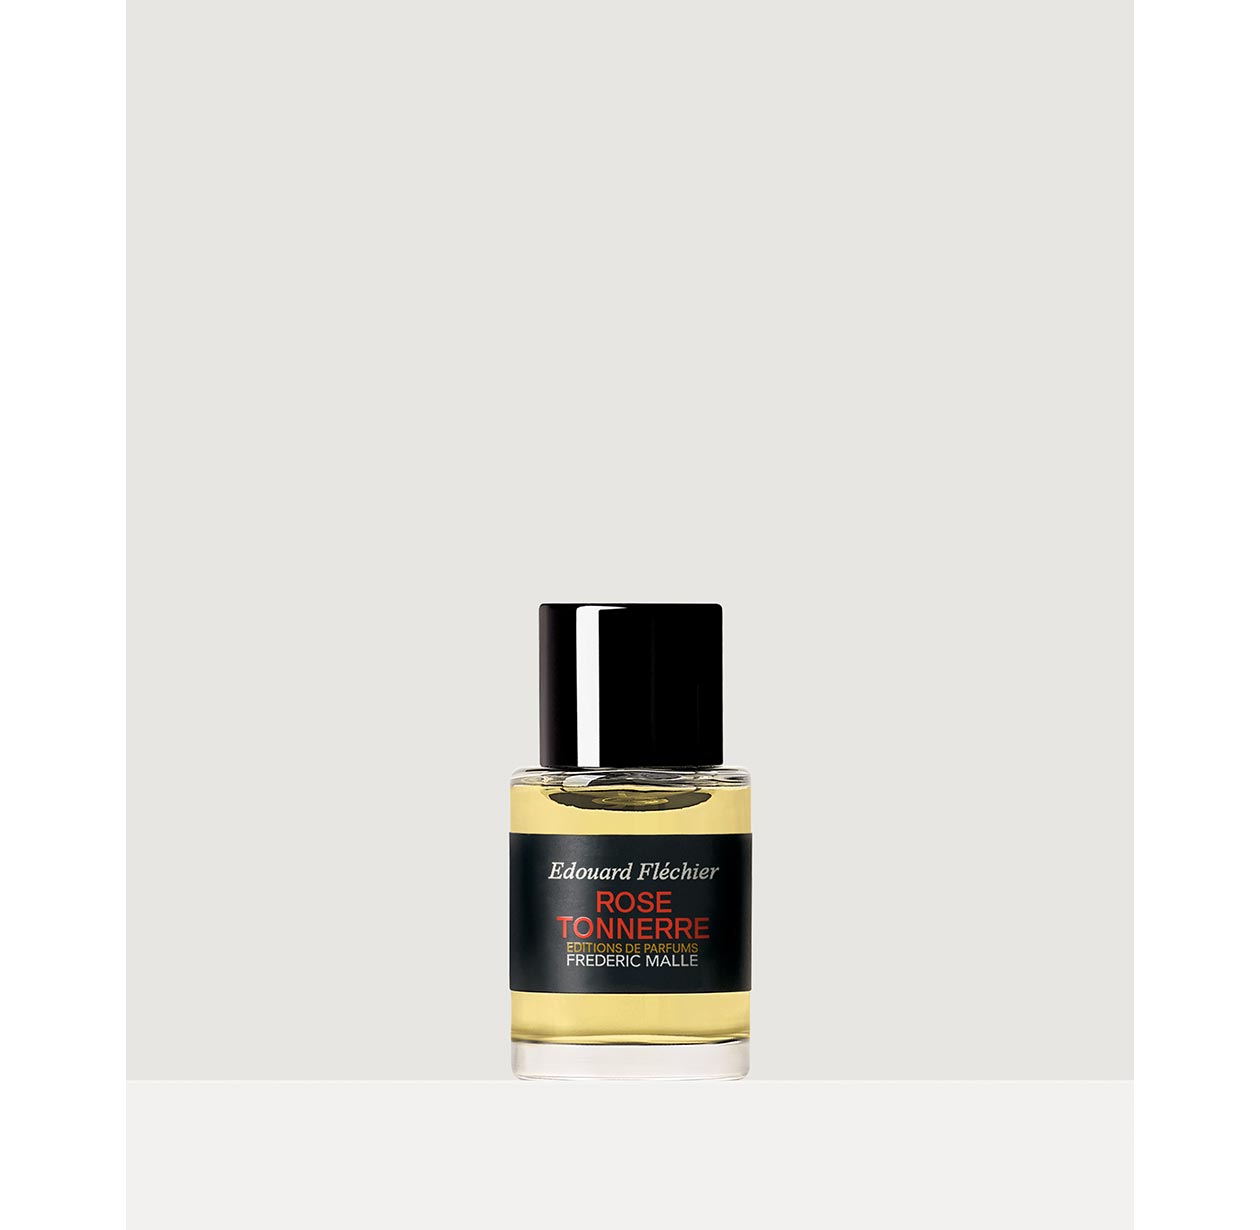 ROSE TONNERRE | Frederic Malle